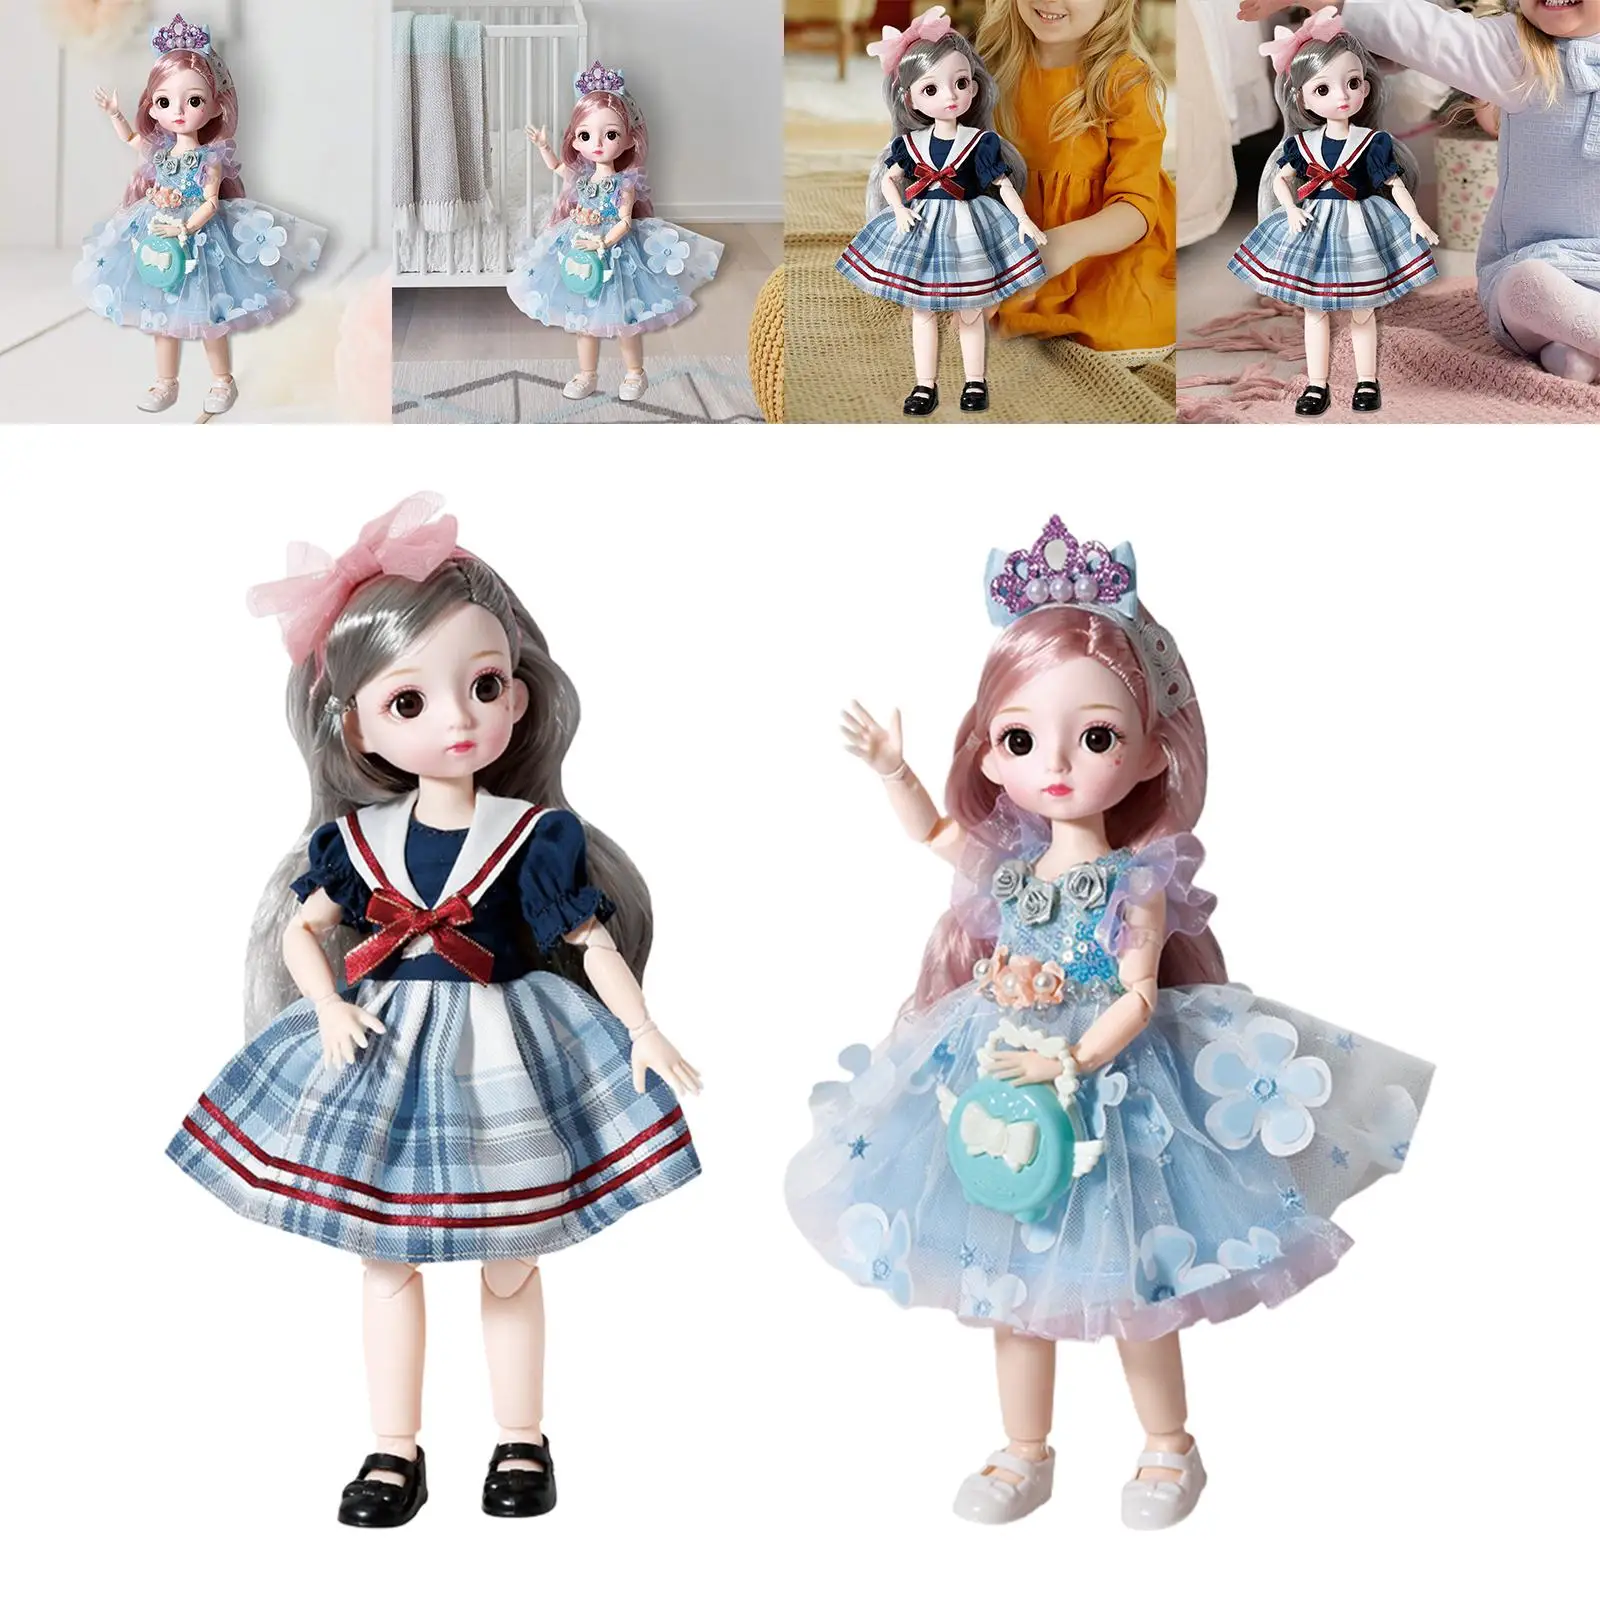 1:6 31cm Fashion Doll Flexible Joints 3D Eyes for Girls Pretend Play Gifts